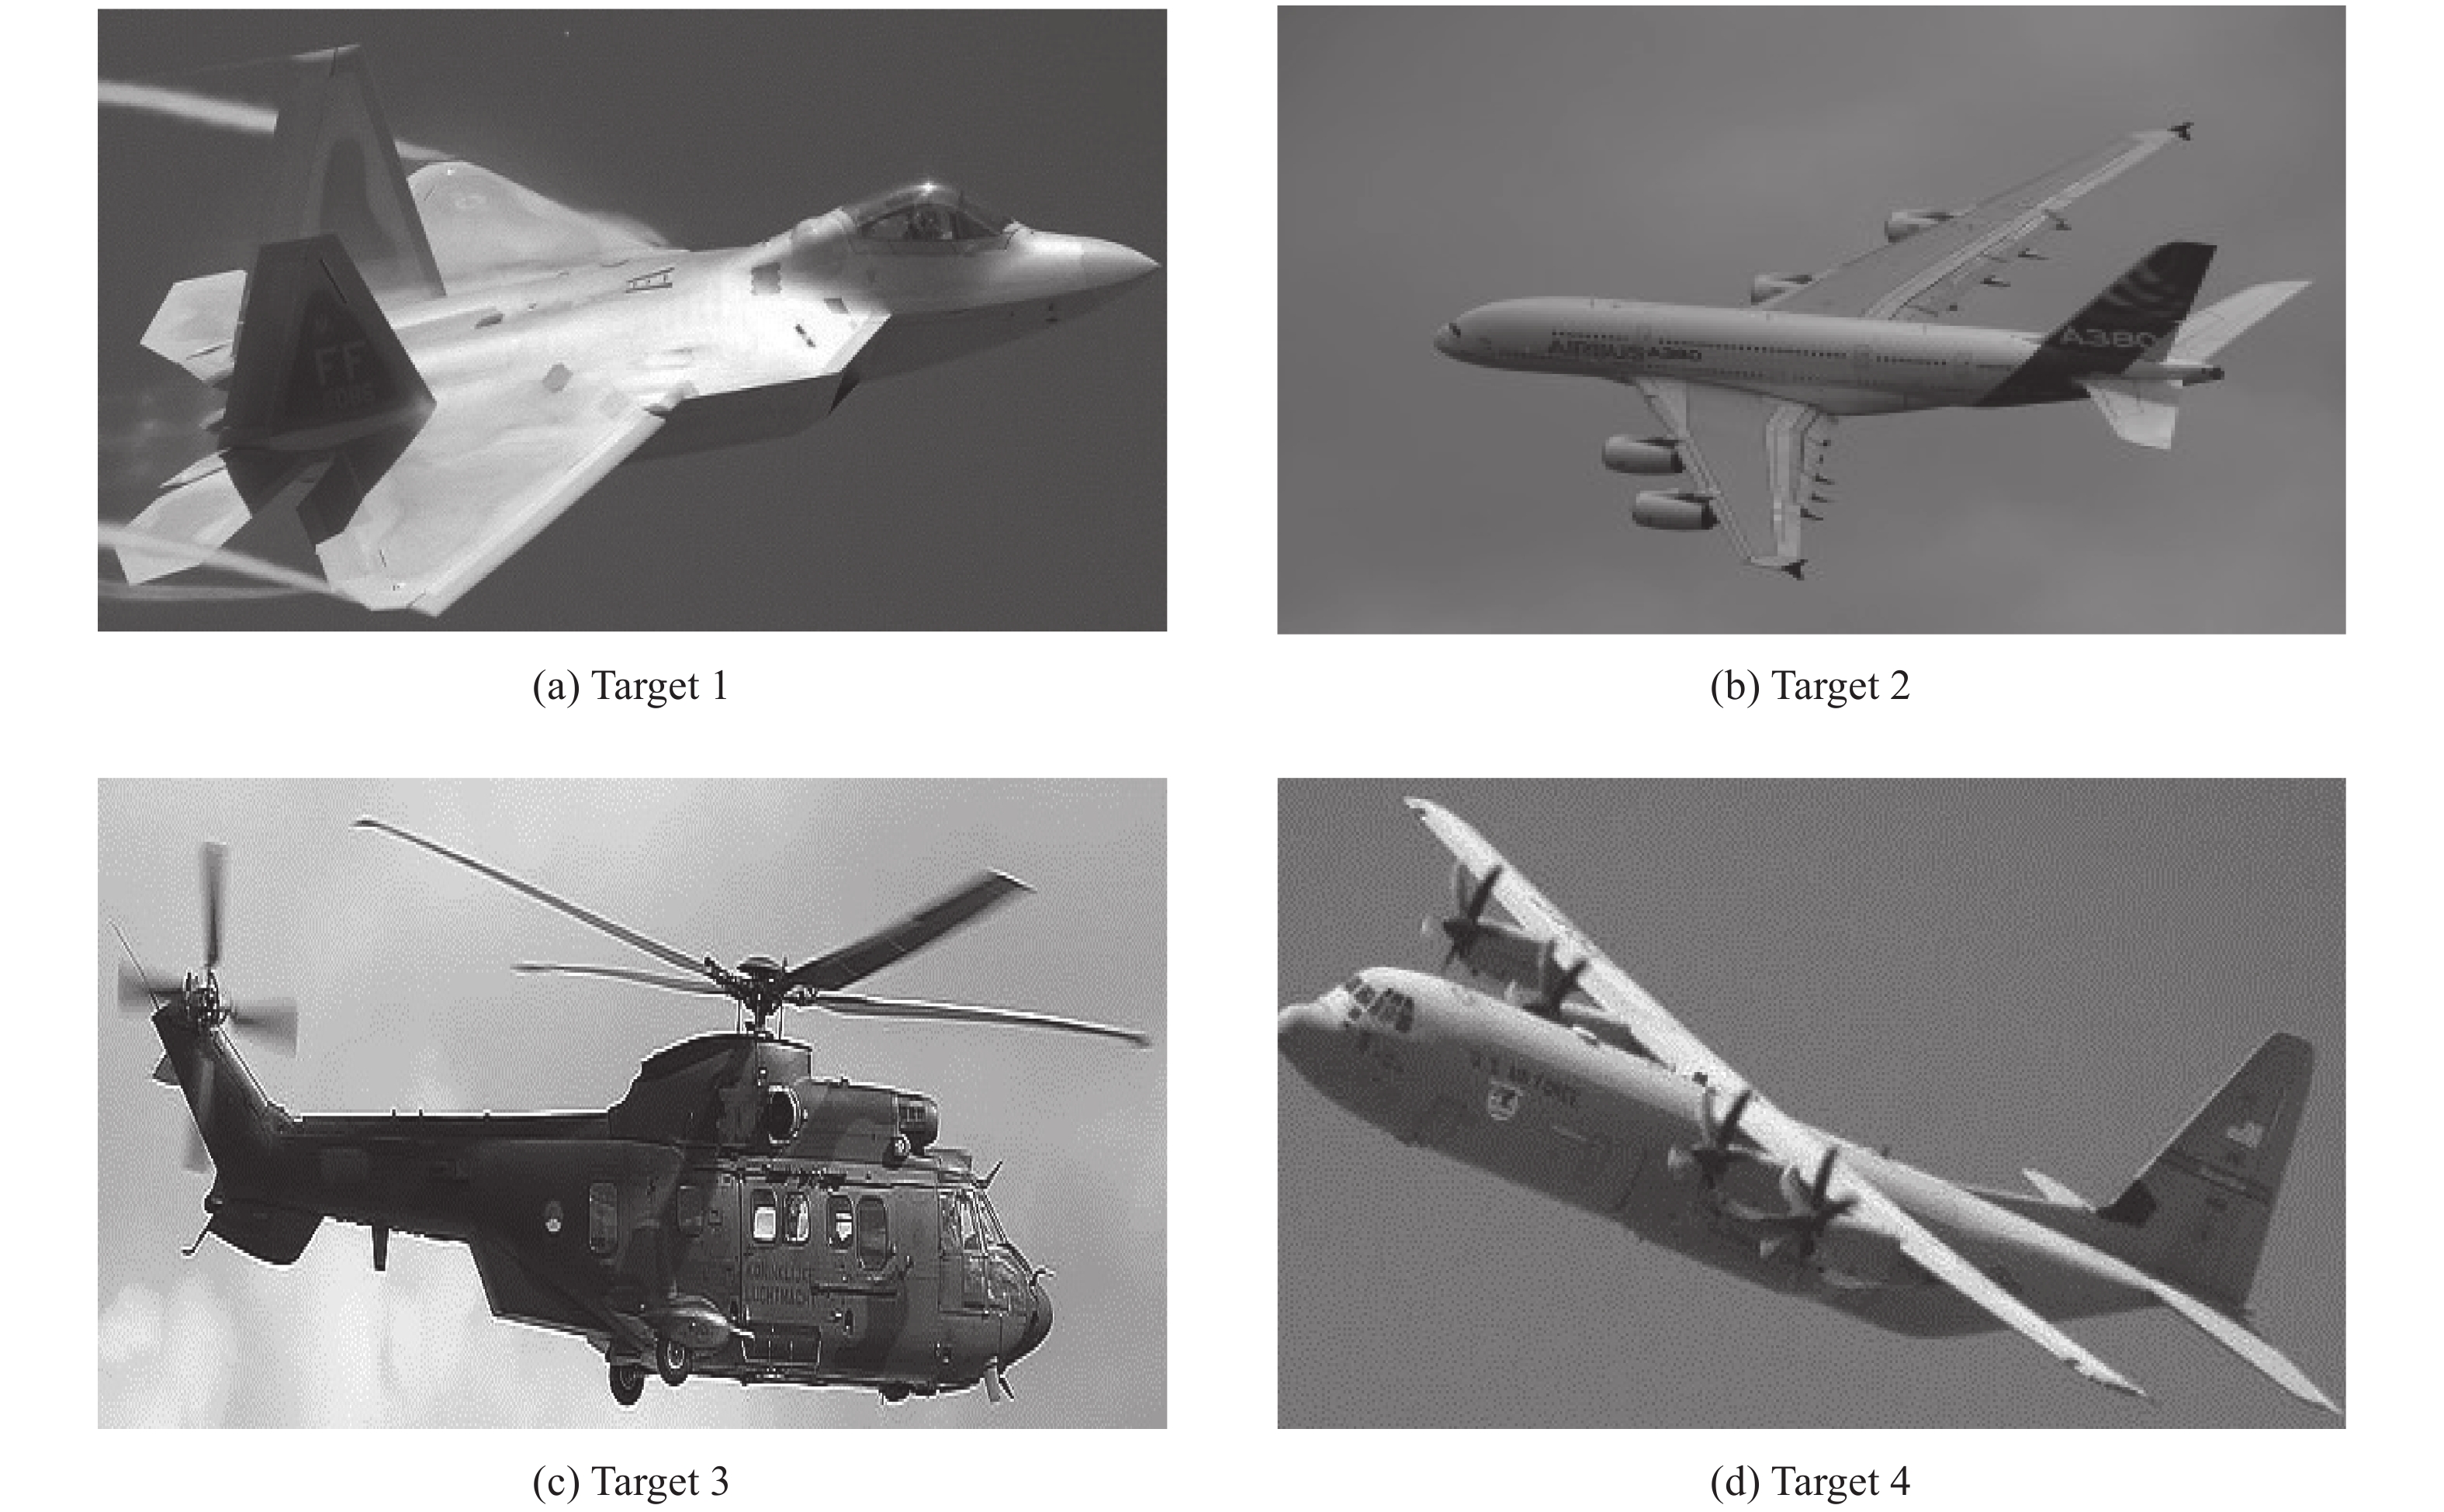 Illustration of four kinds of aircraft targets